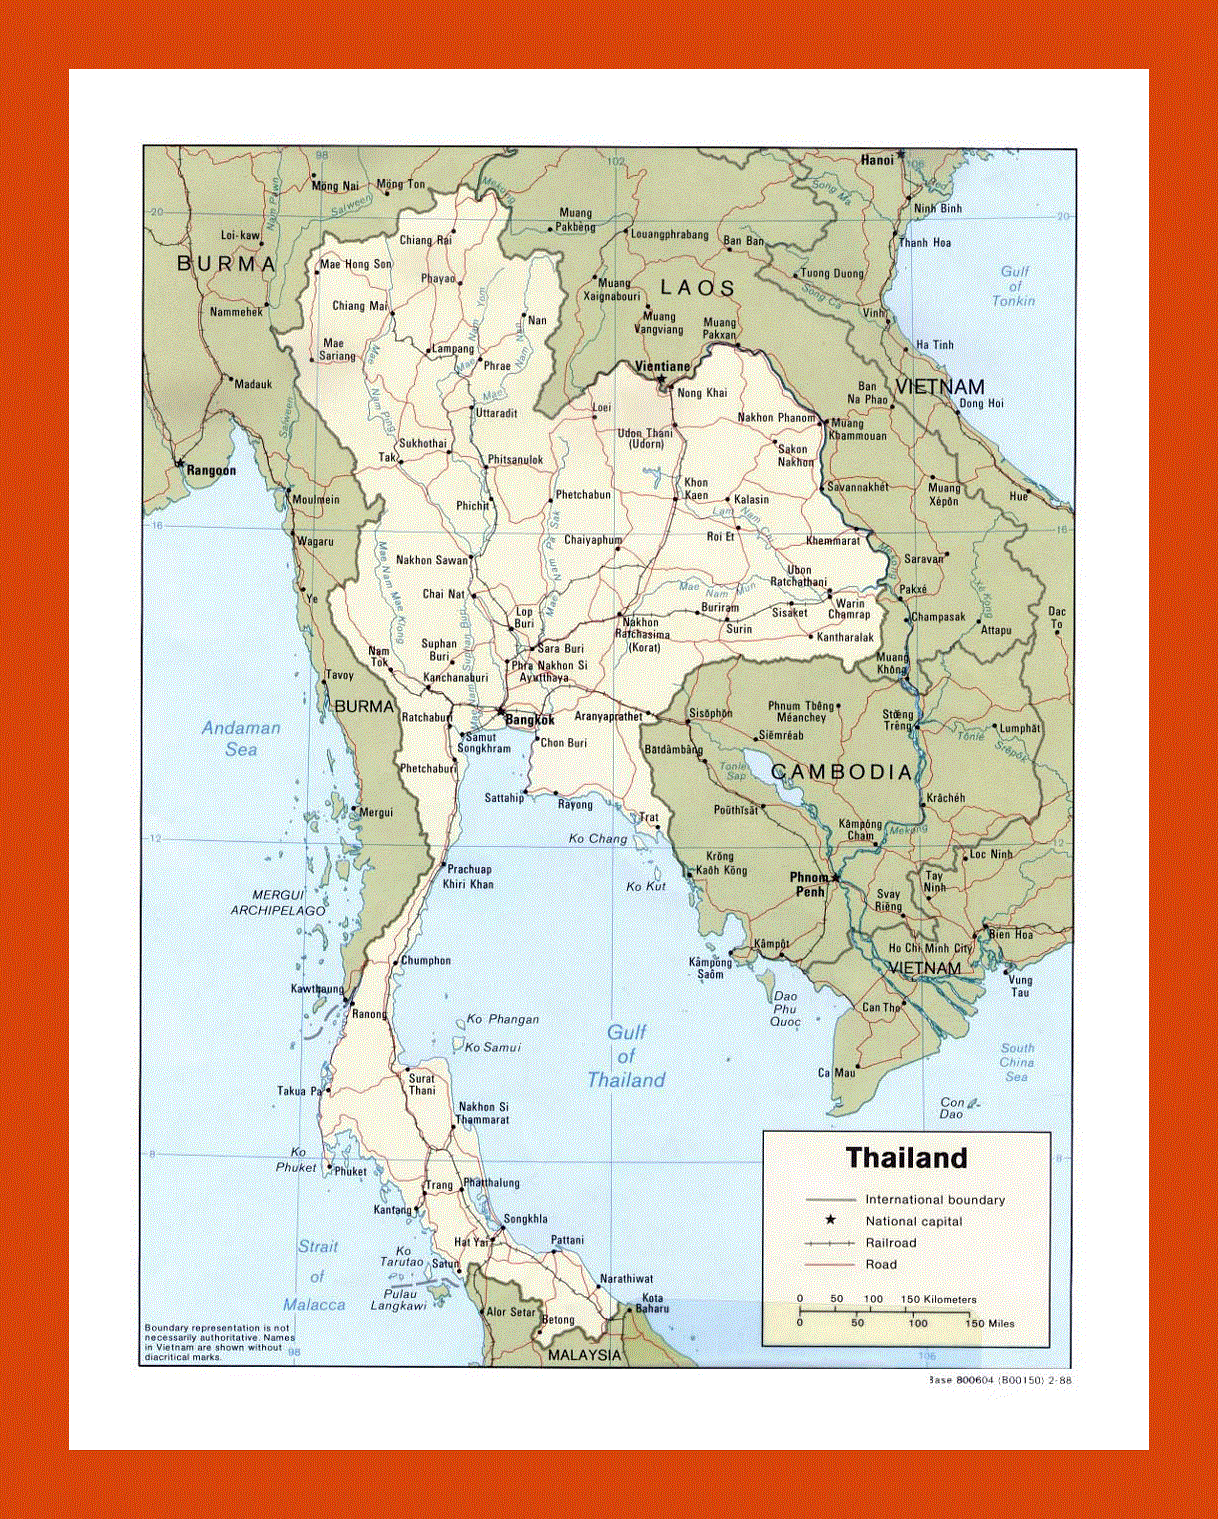 Political map of Thailand - 1988